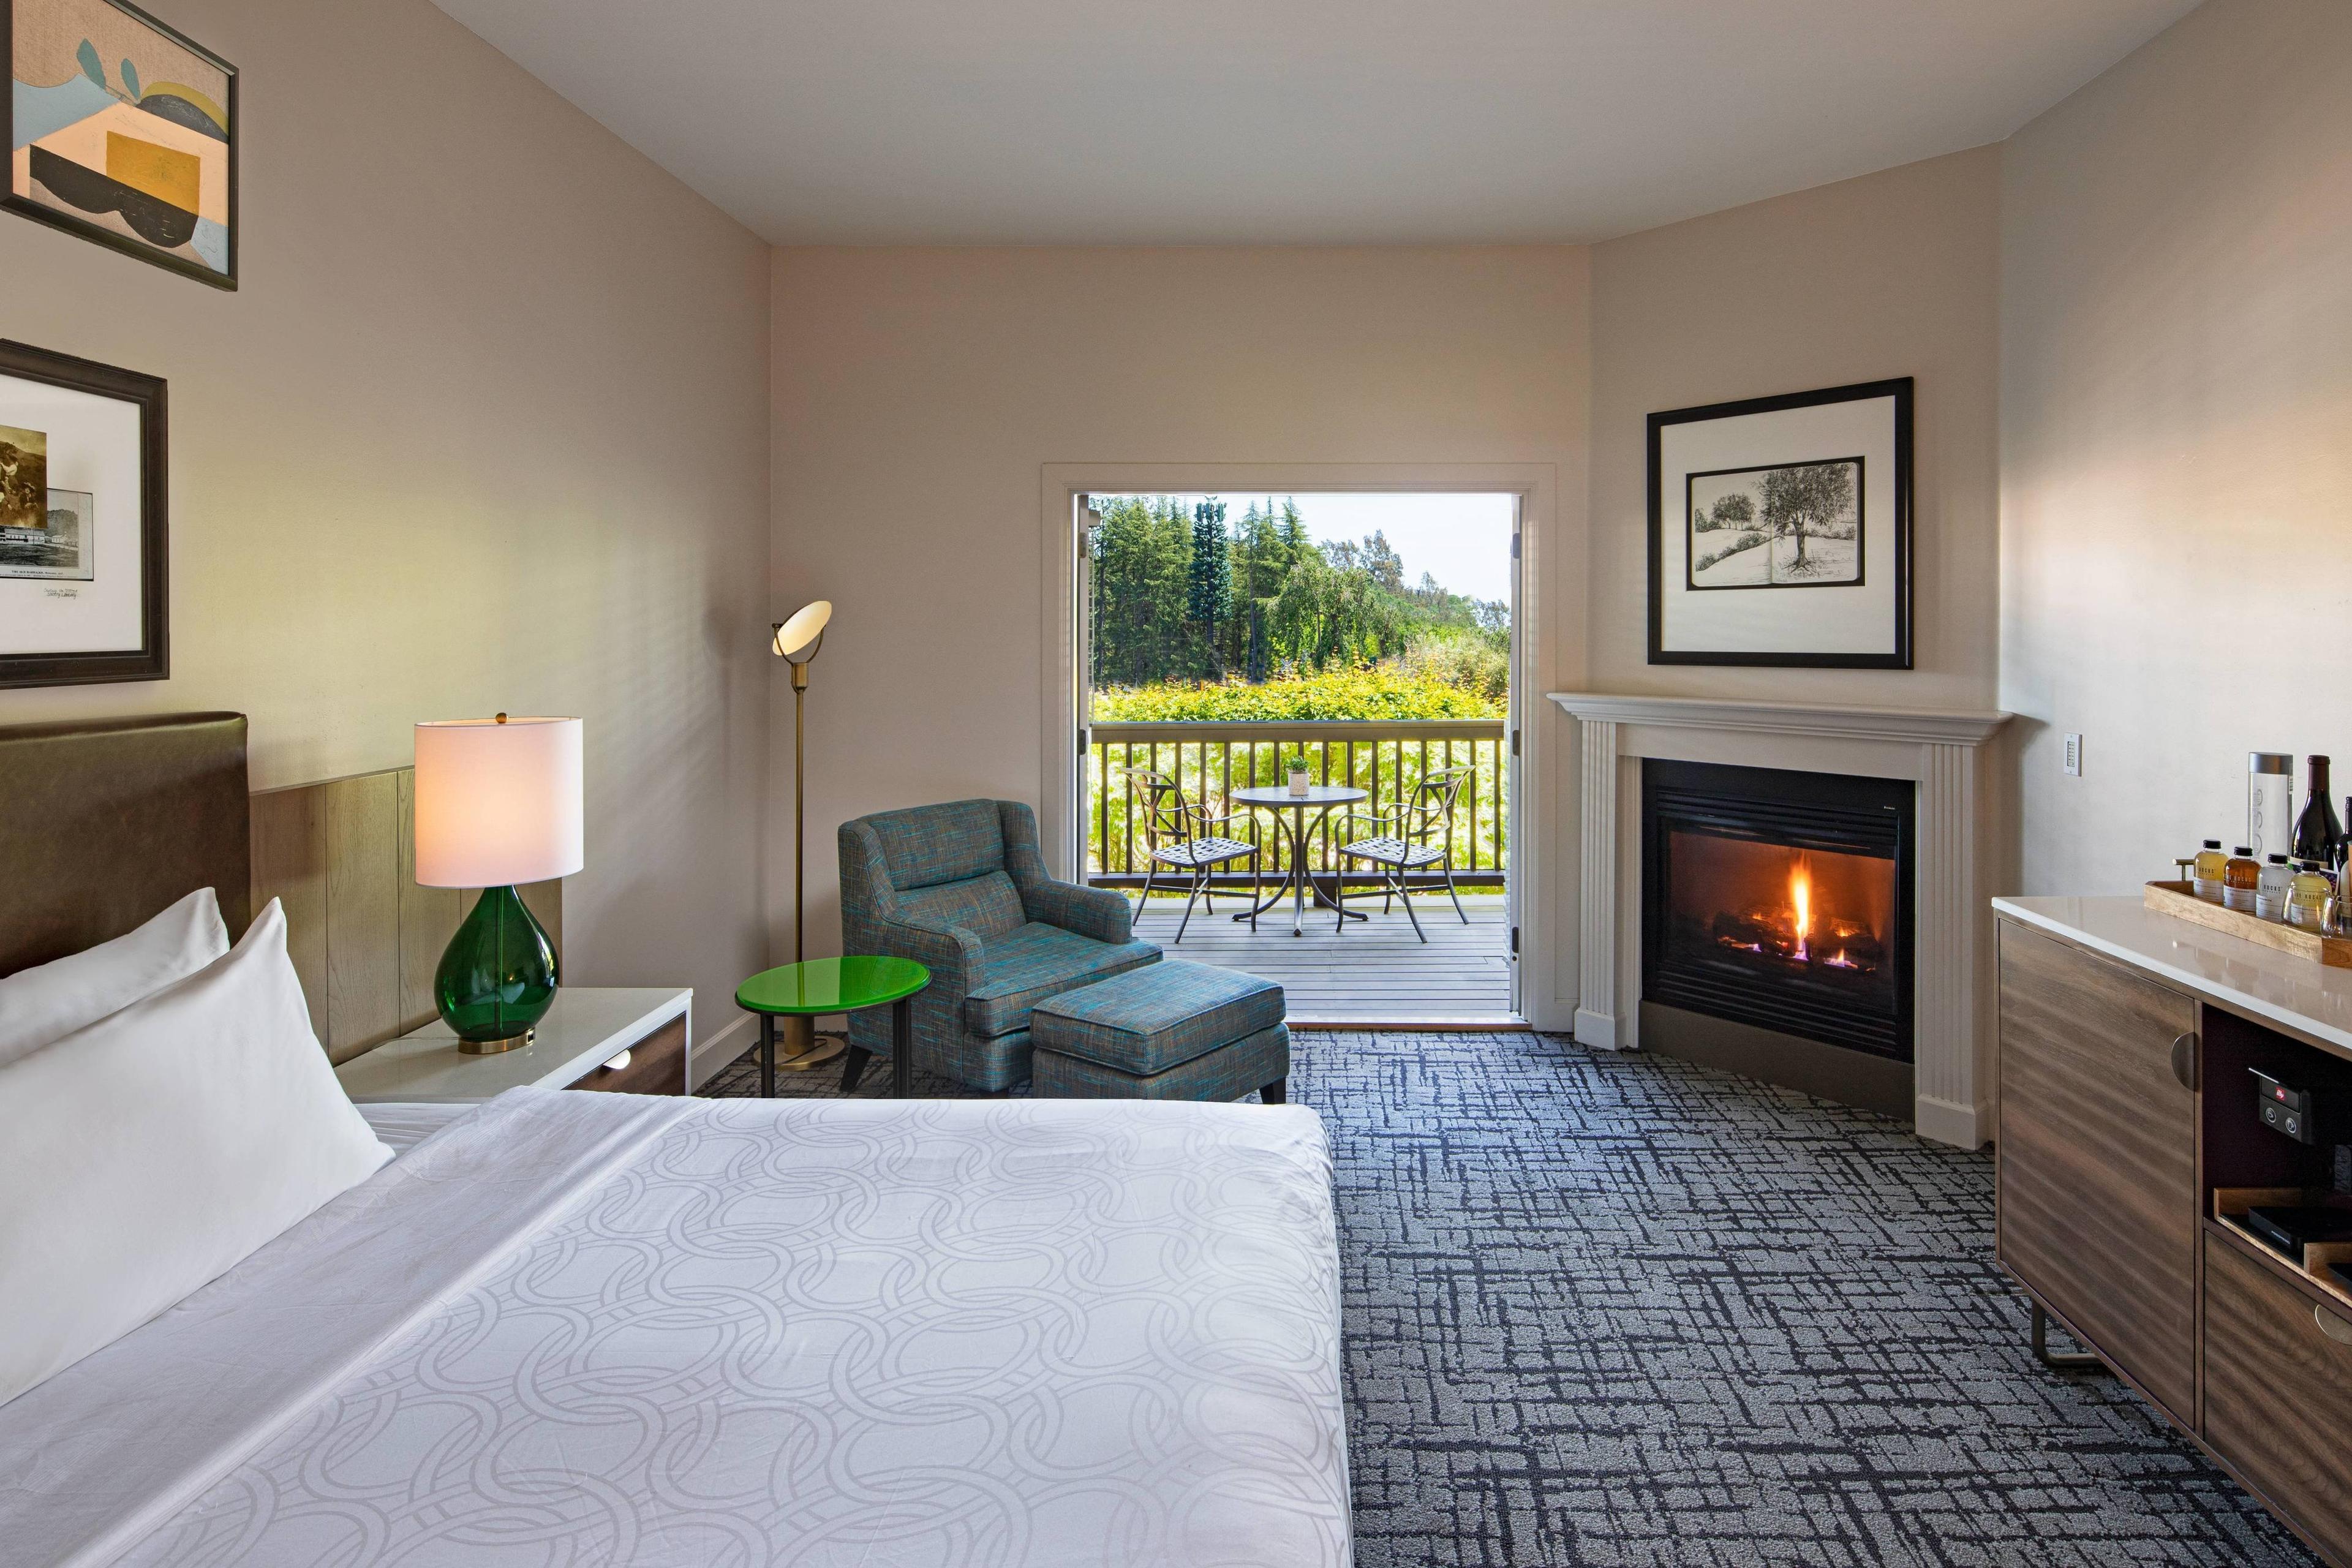 With this premier room’s views of the resort, lush landscape or pool, you’ll want to get outside and have coffee in the warm Sonoma sun — a great start to another memorable day.